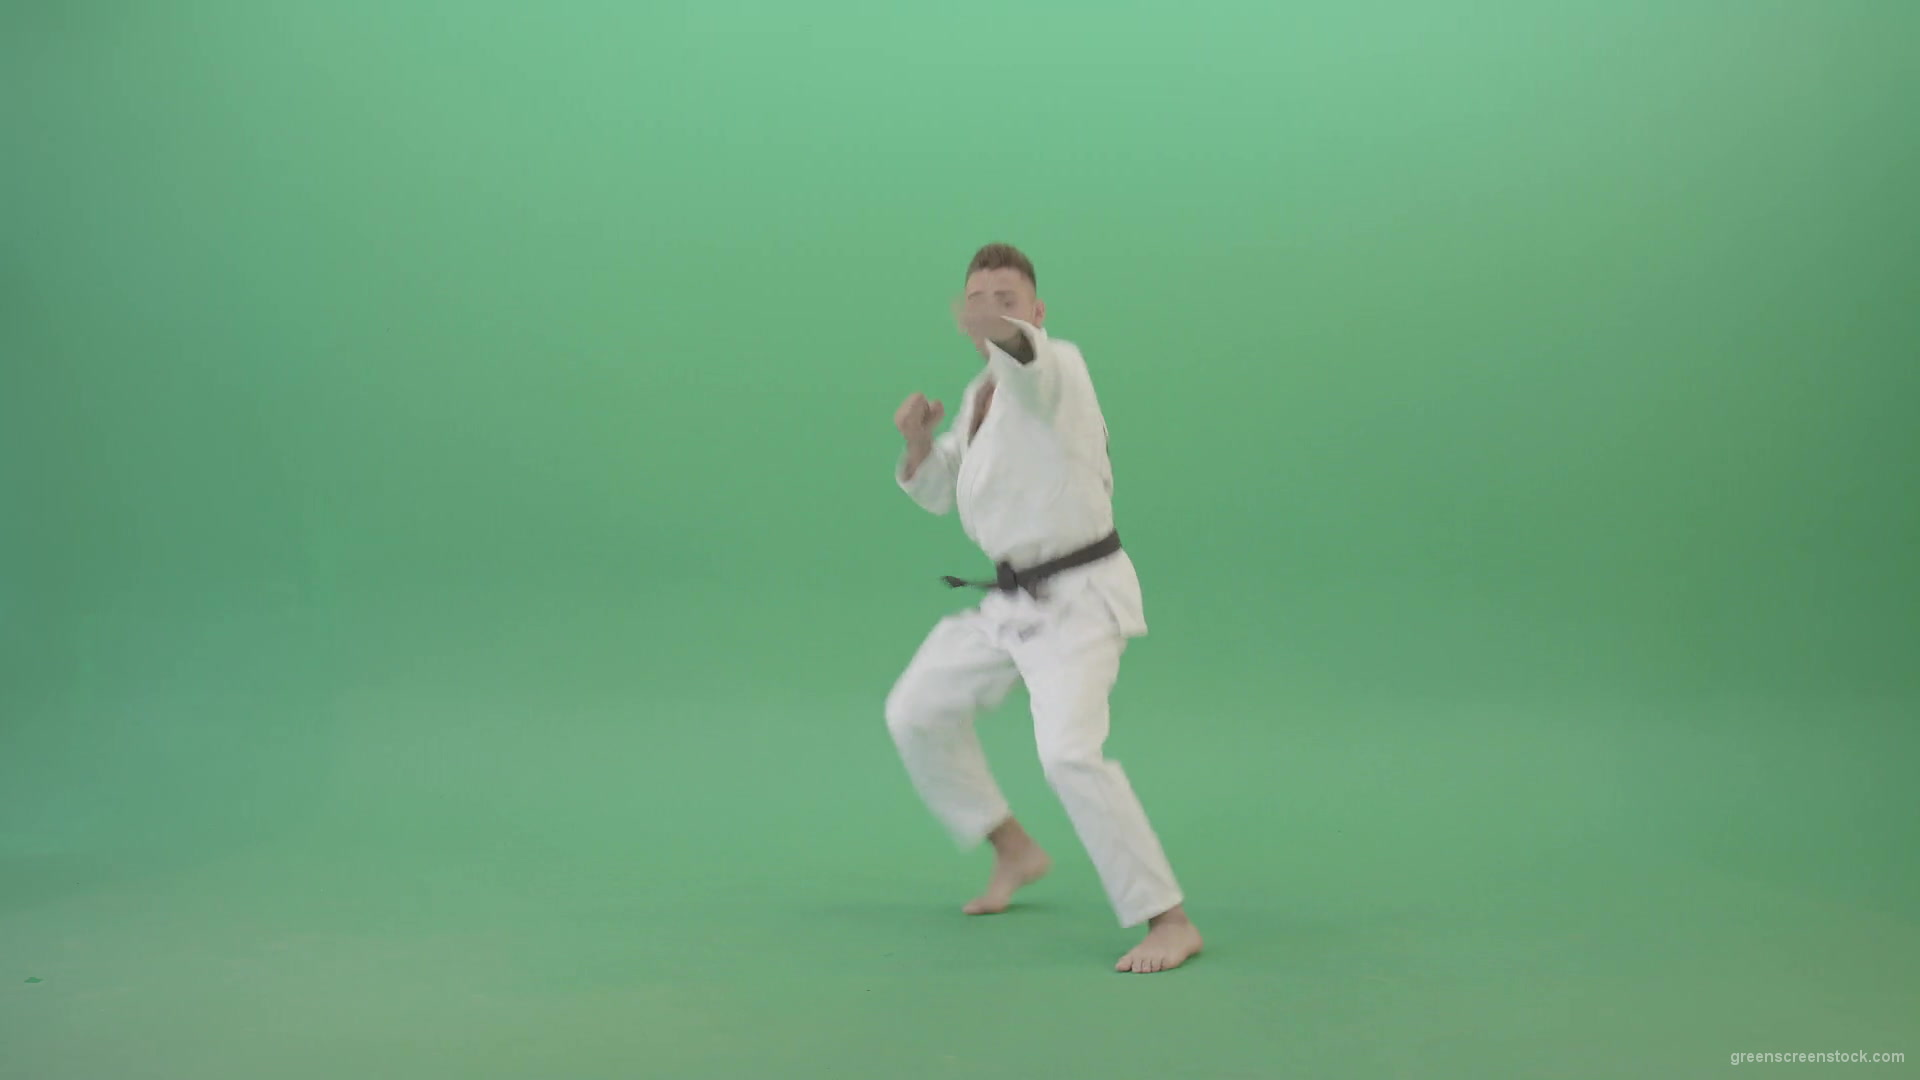 Karate-man-fight-front-vie-kick-punch-isolated-on-green-screen-4K-Video-Footage-1920_006 Green Screen Stock